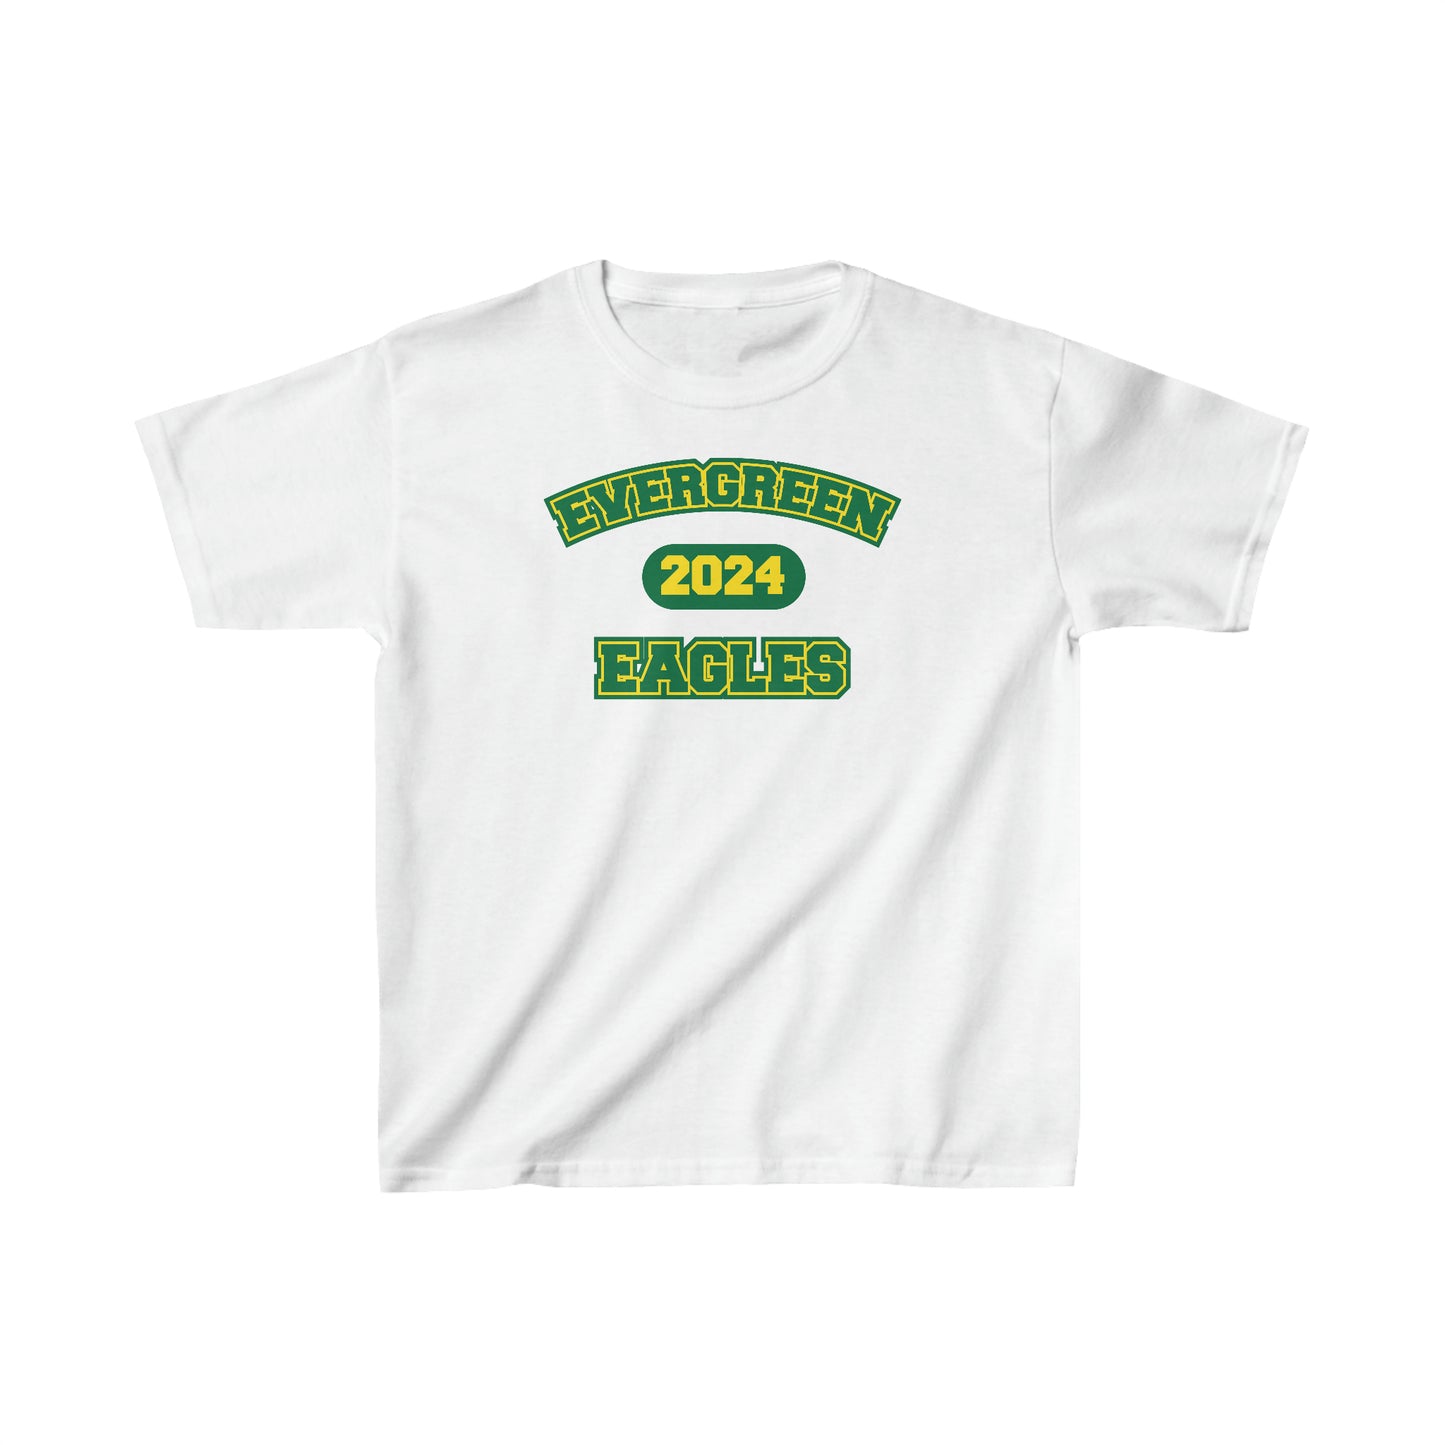 Eagles 2024 Tee - Youth